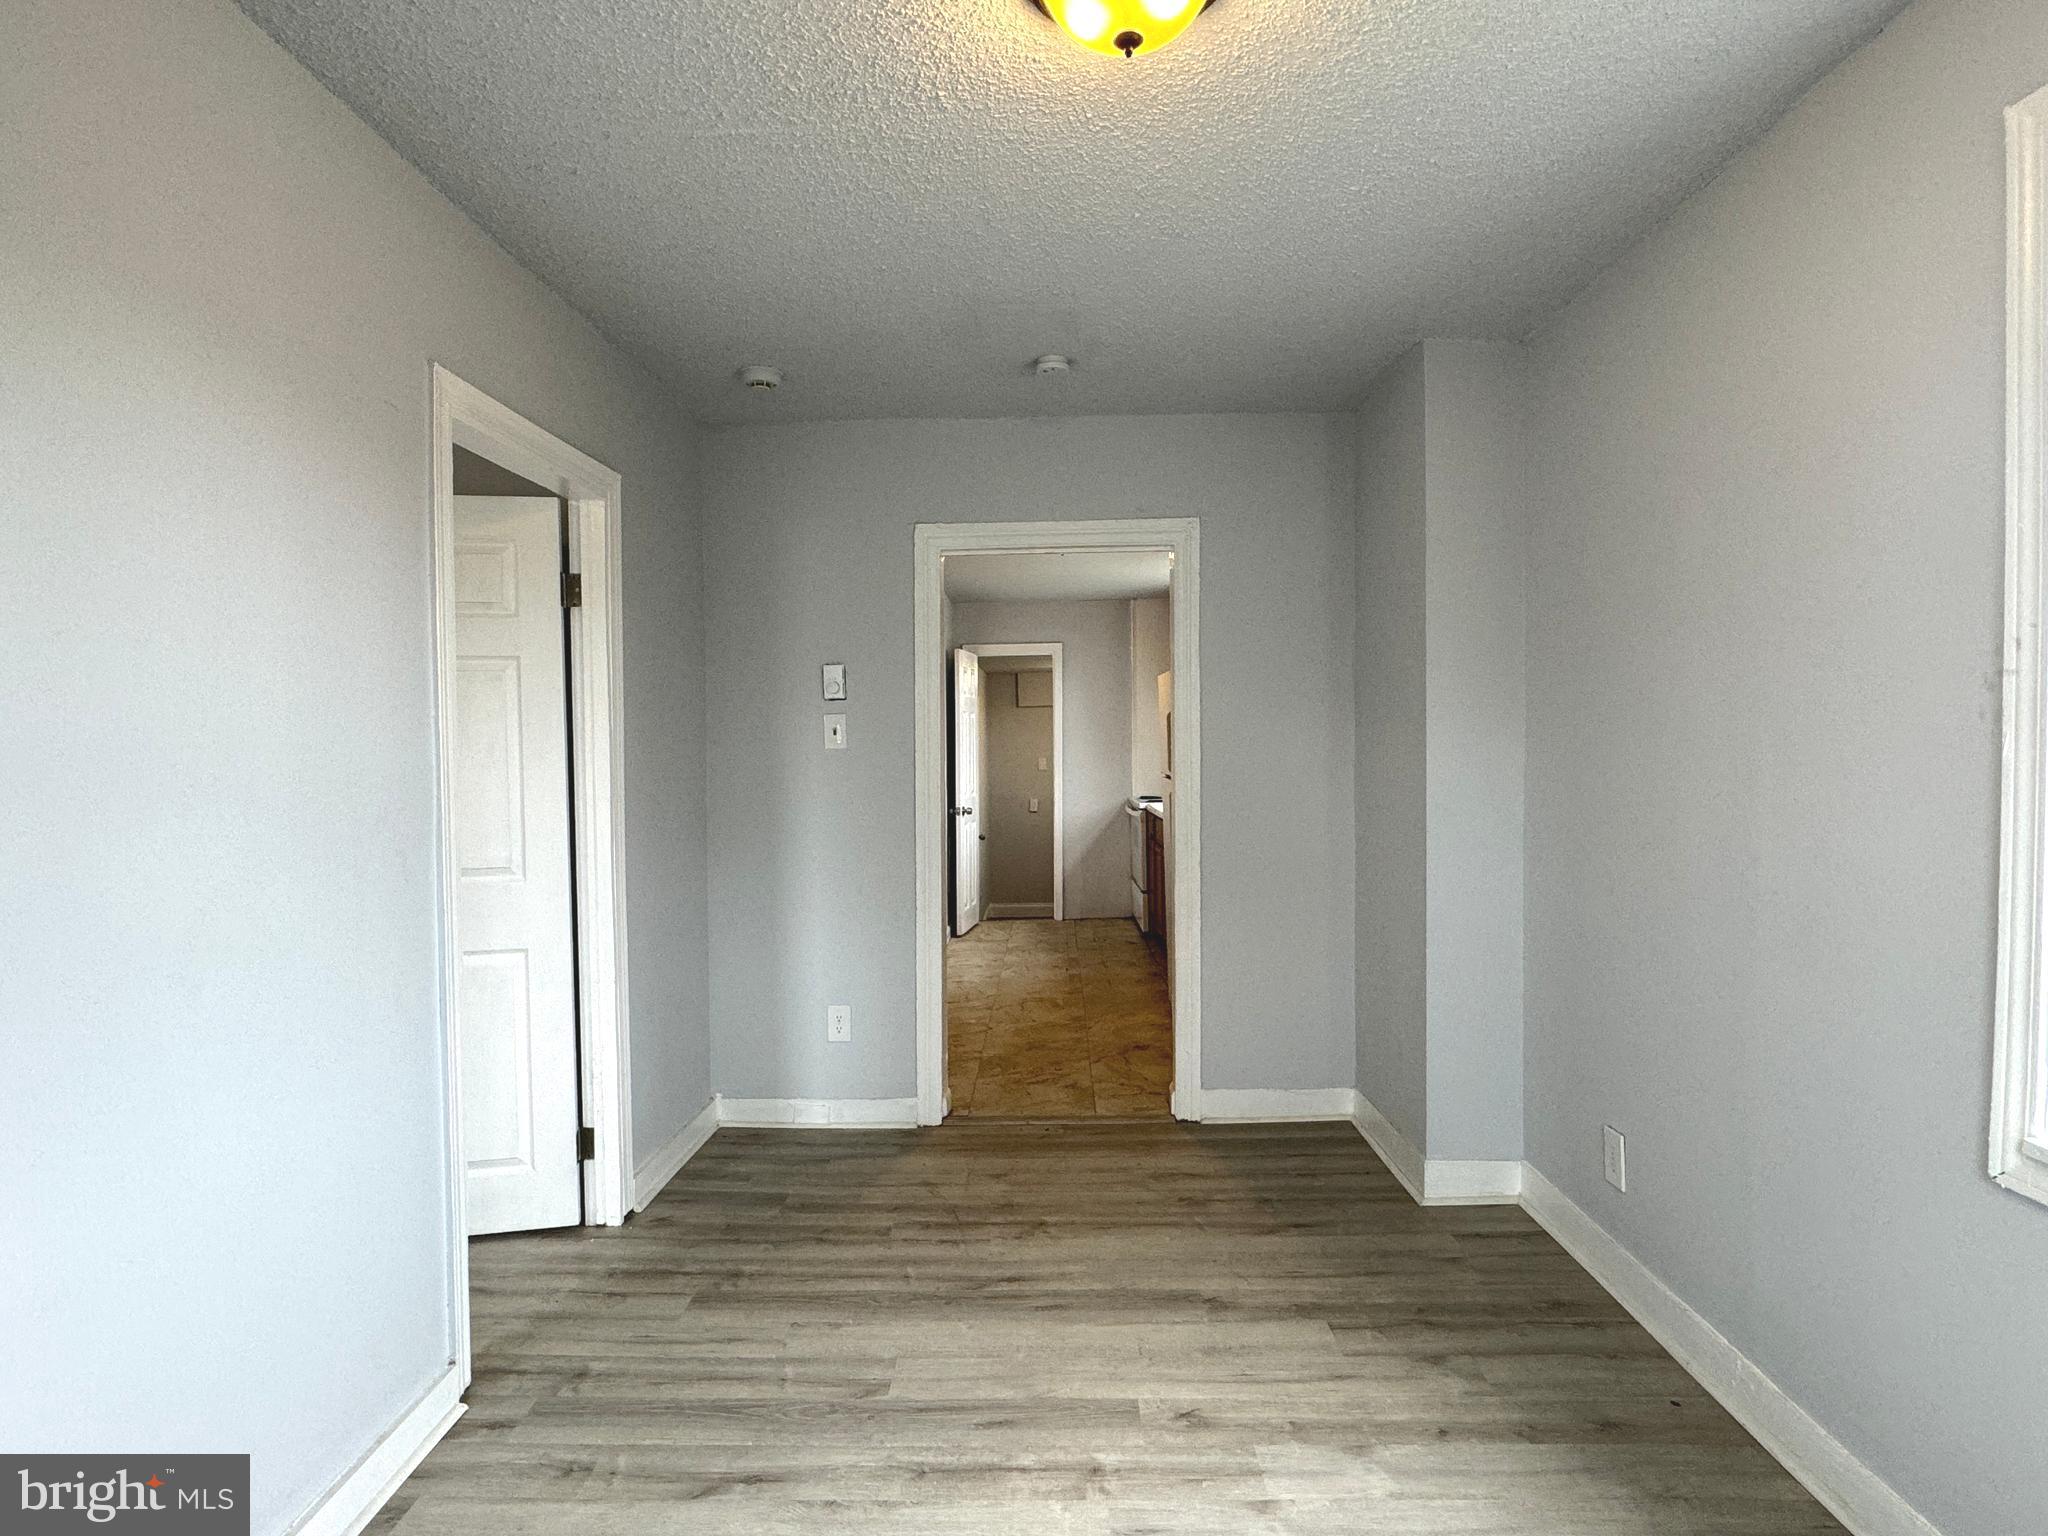 a view of hallway with wooden floor